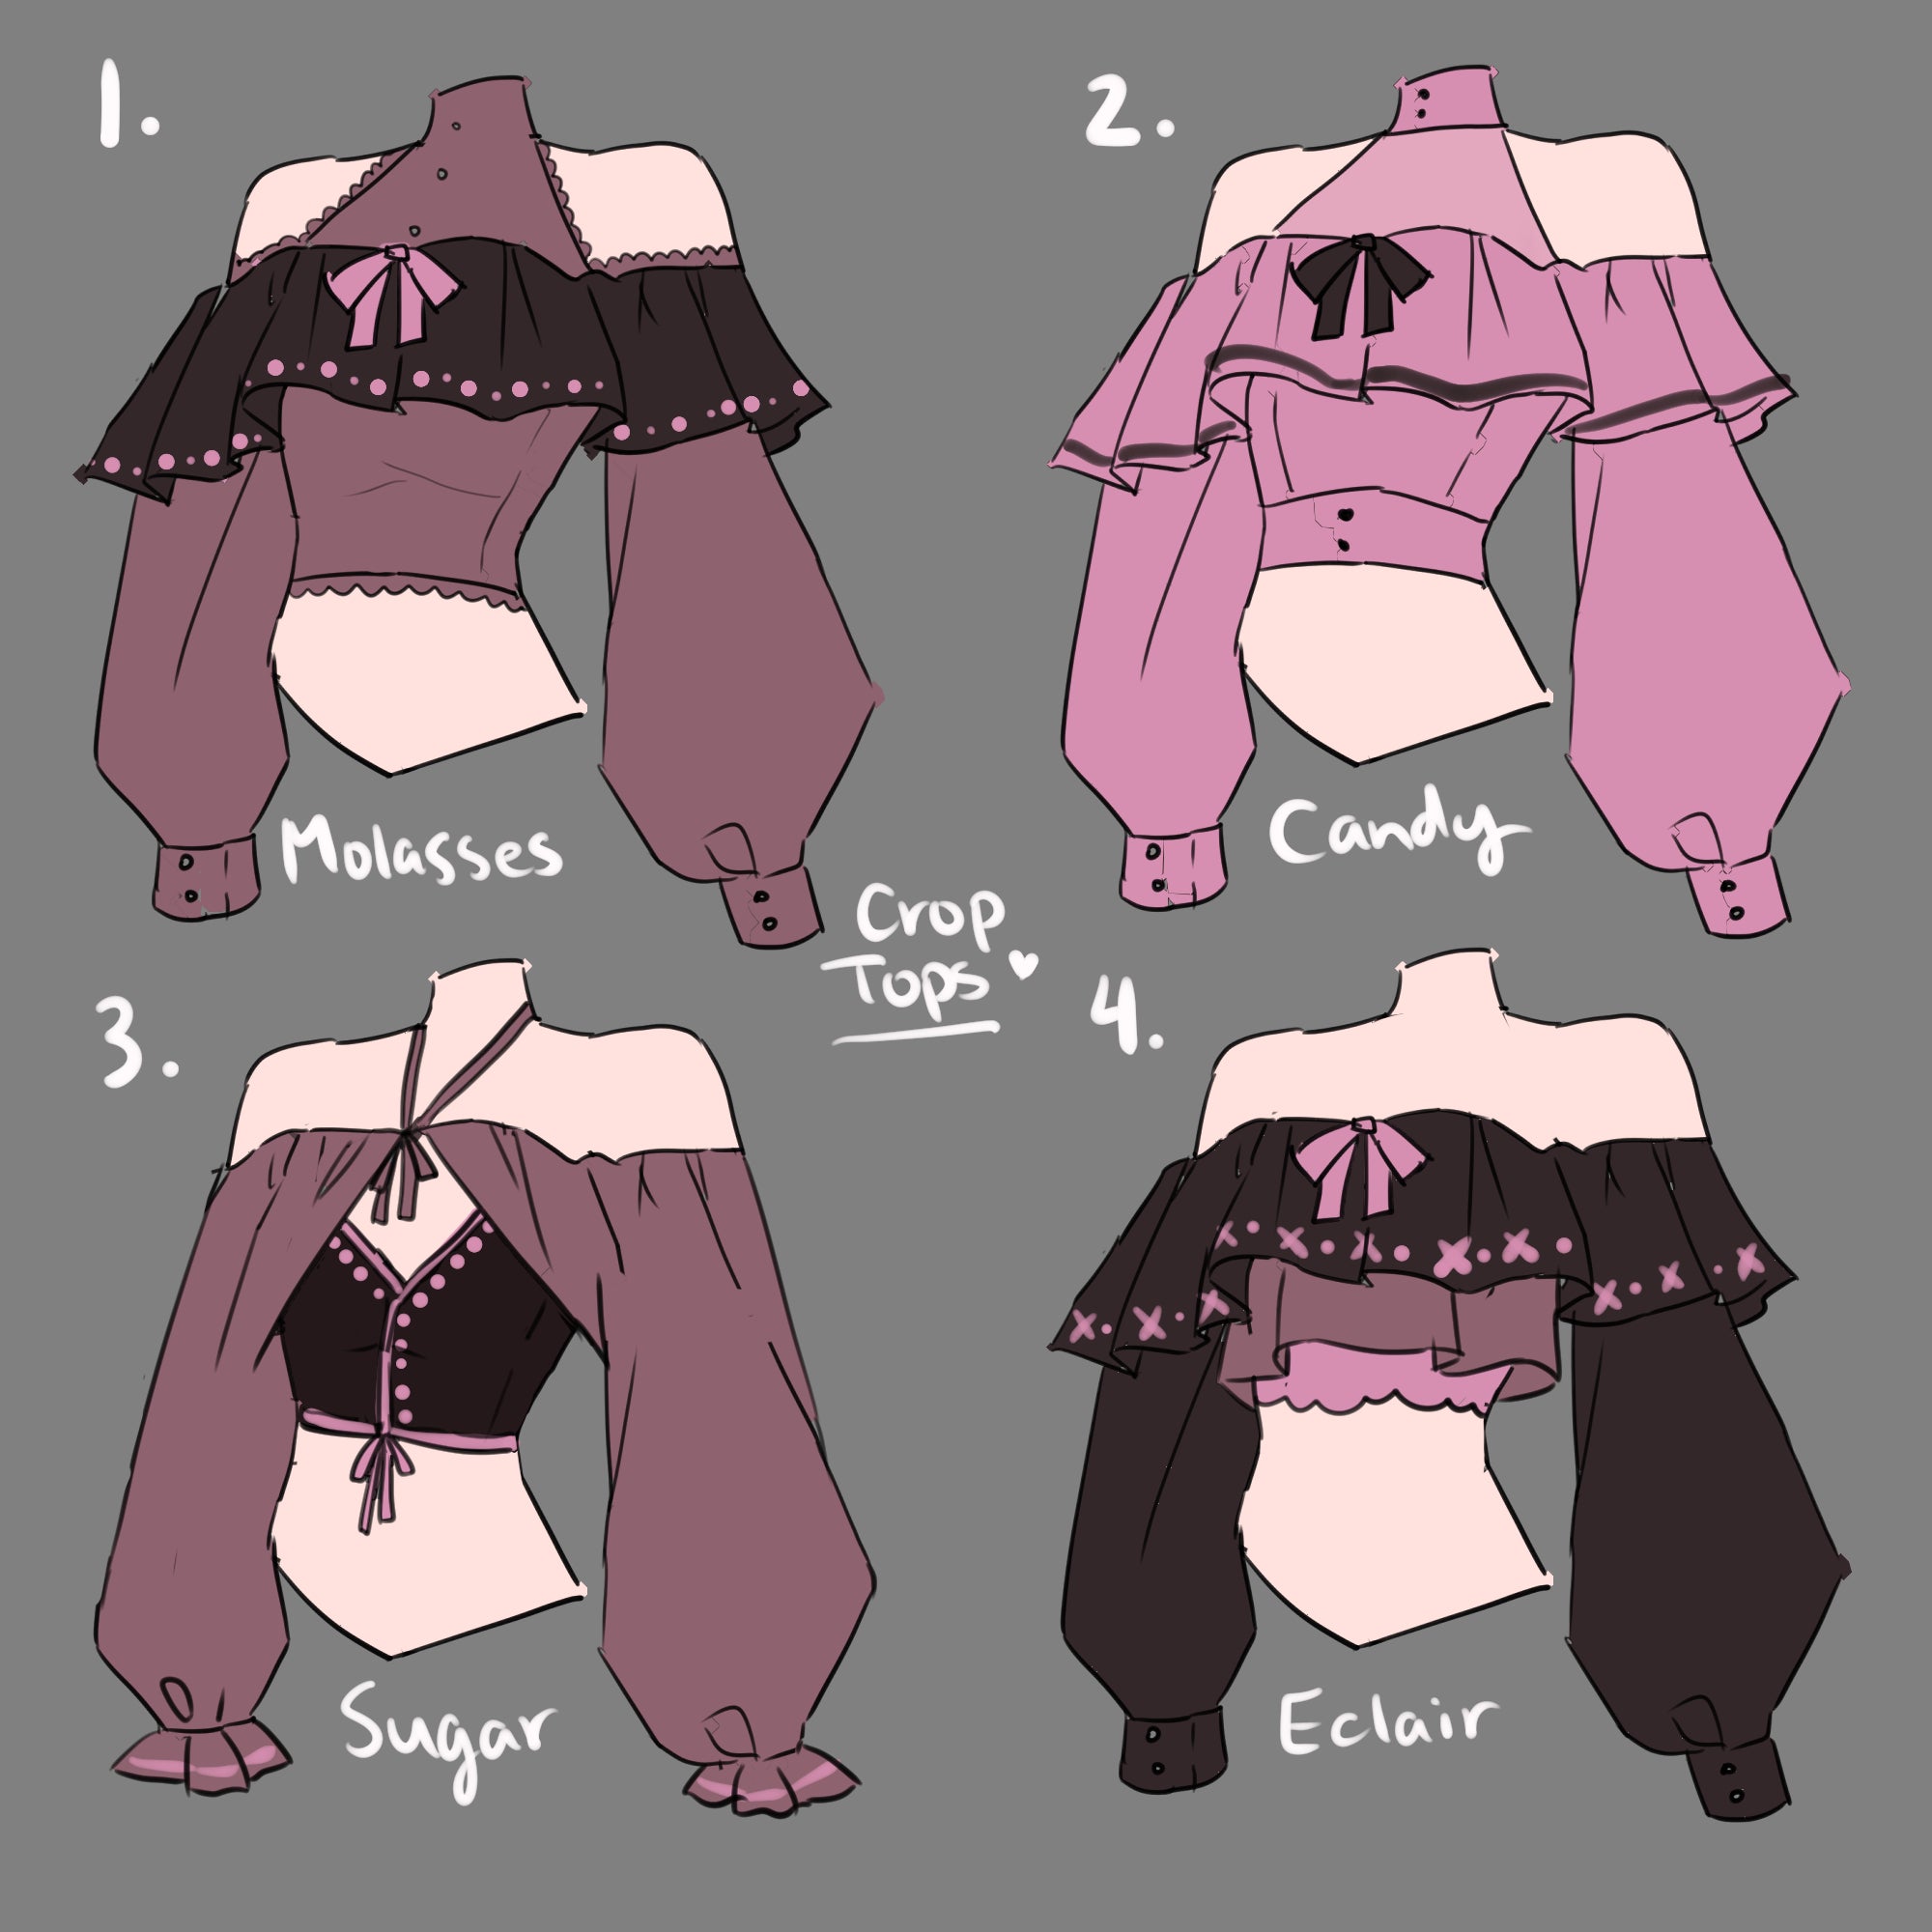 Pixilart - Anime clothes base by Golden-gurl